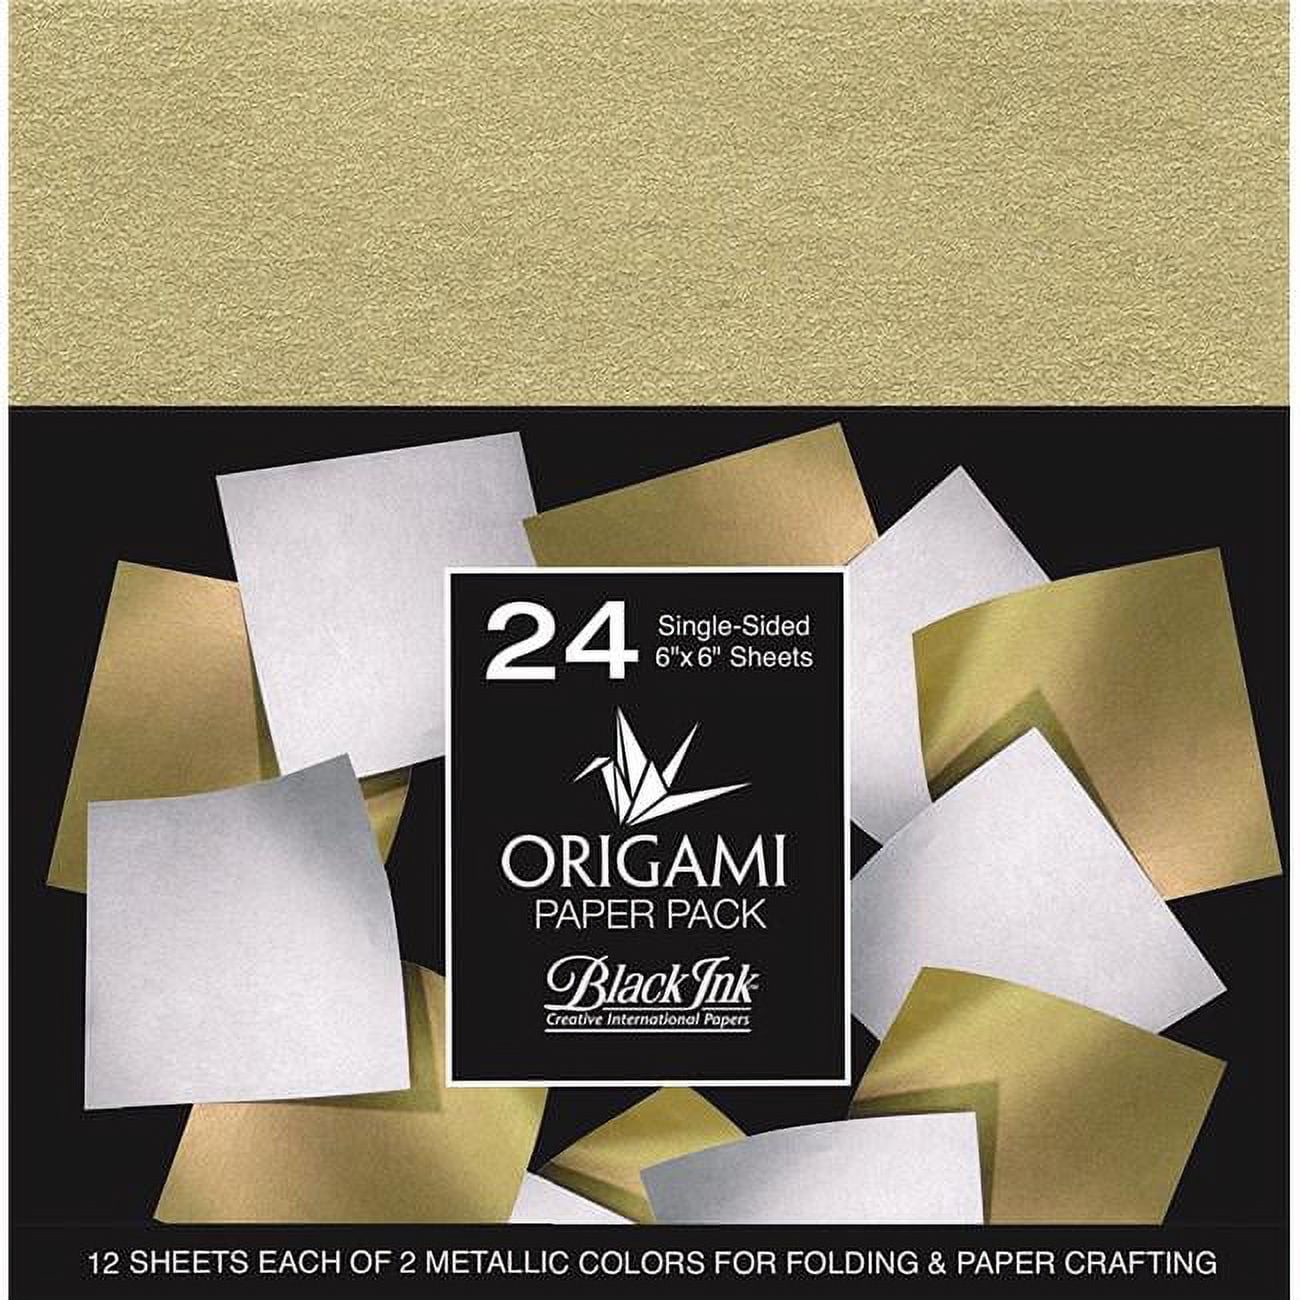 100 Gold Origami Paper Sheets Paper Pack 500 1000 Origami Paper 6x6 Inches  for Folding Paper , Origami Cranes , Origami Decoration 